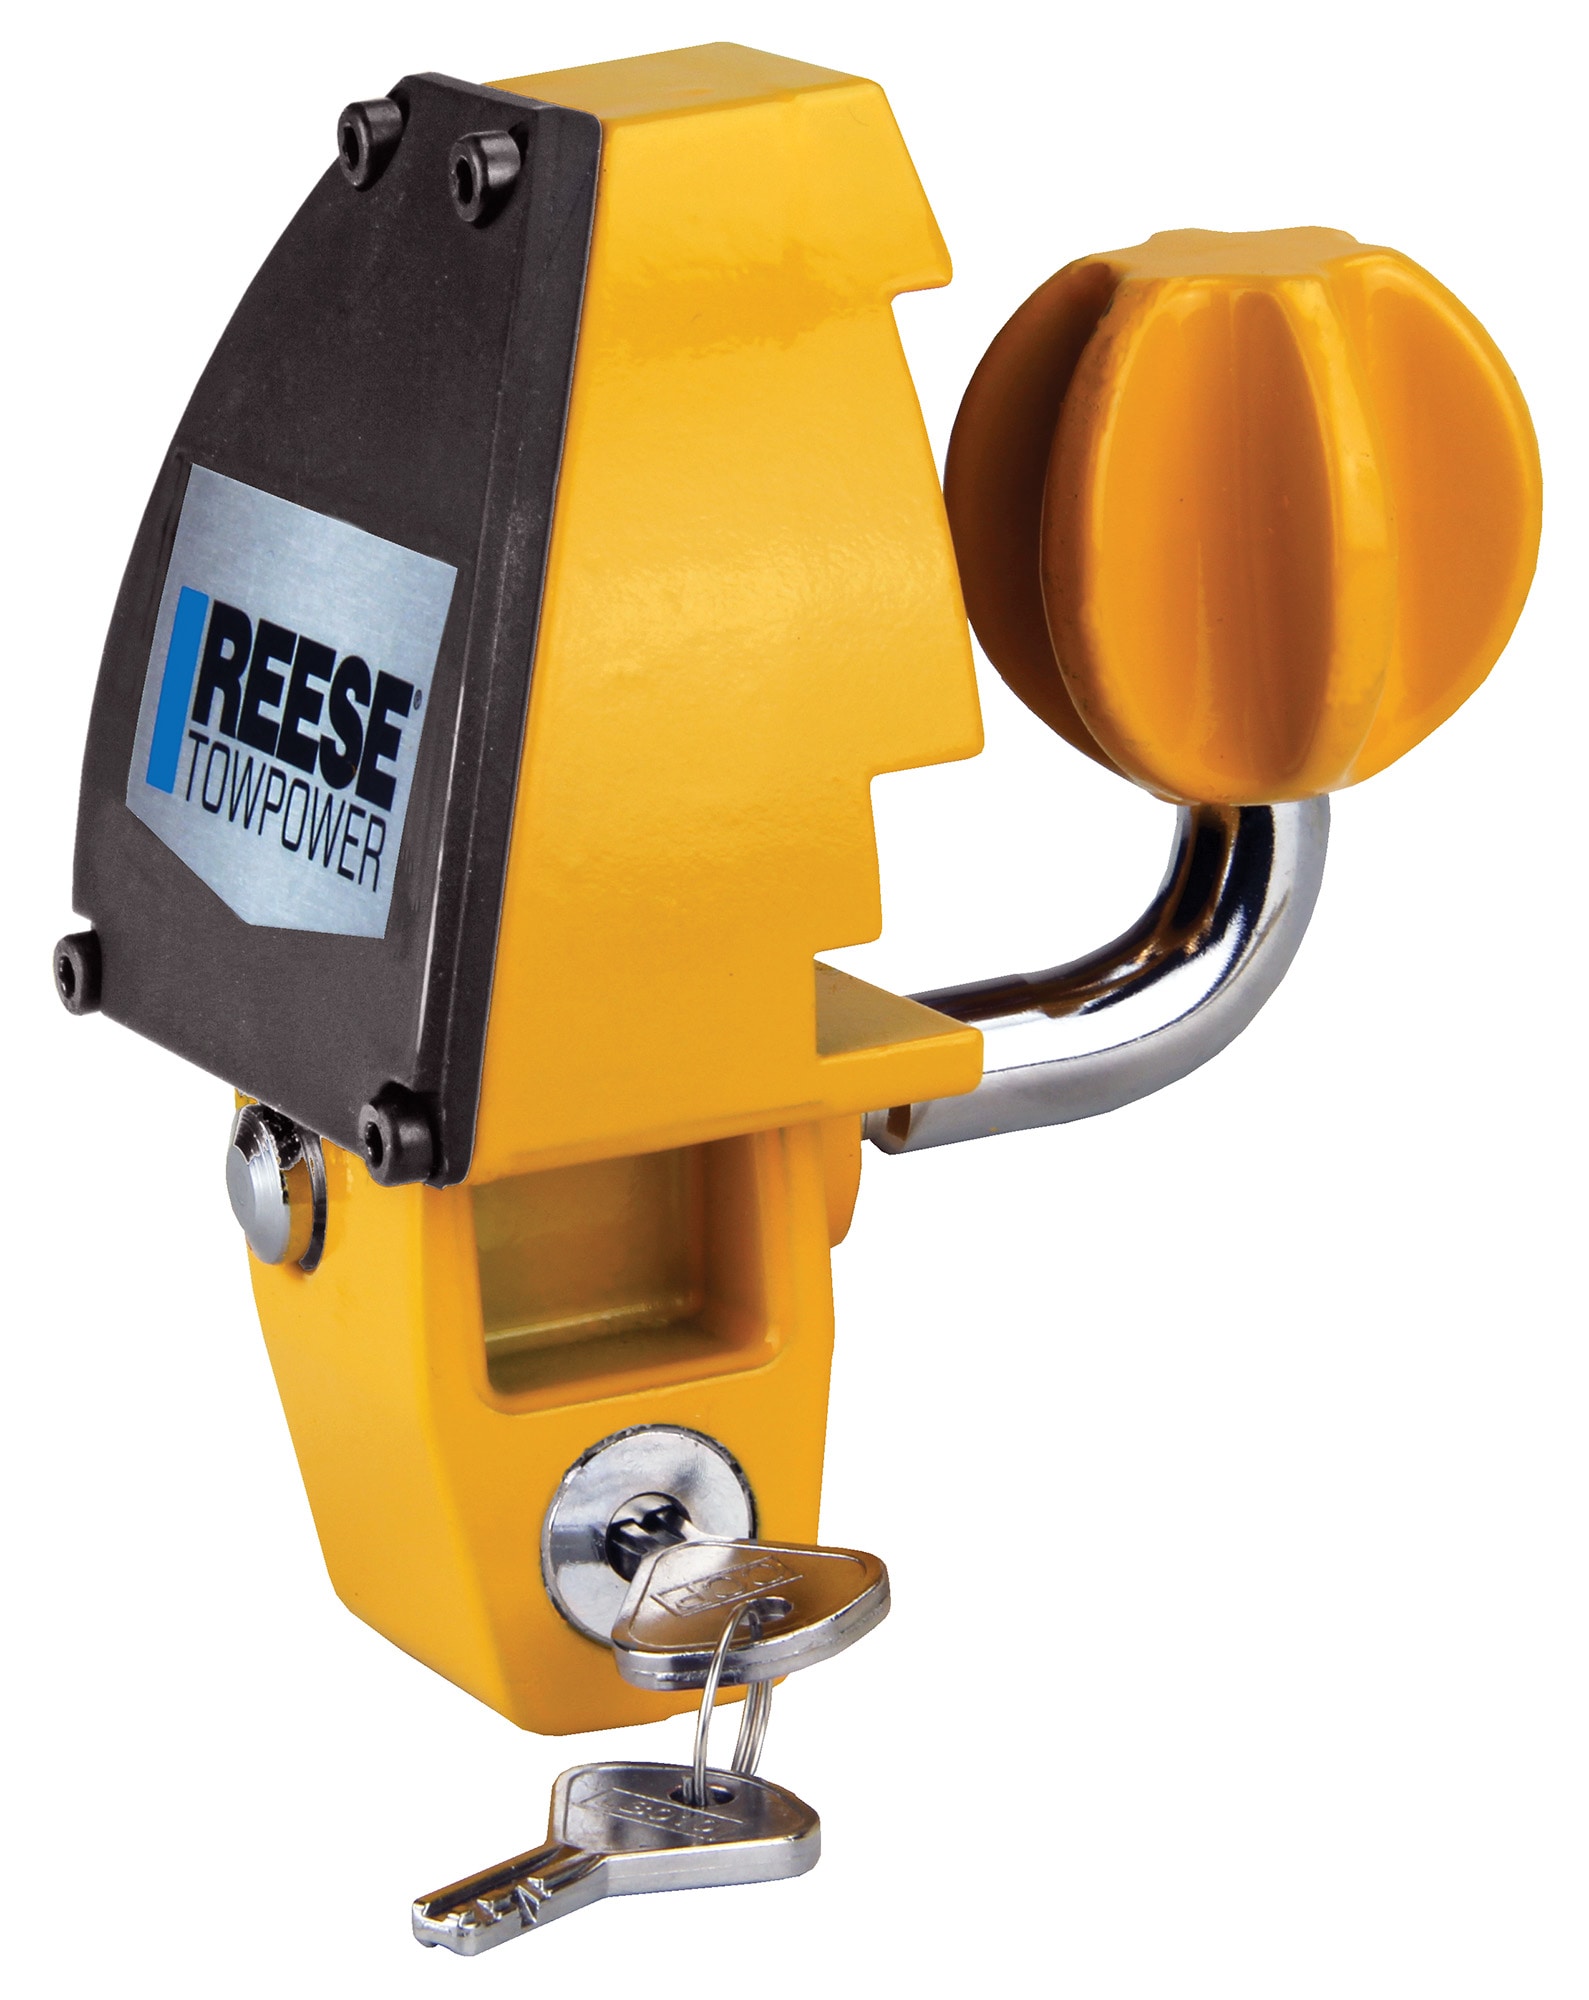 Reese Towpower Professional Universal Coupler Lock in the Trailer